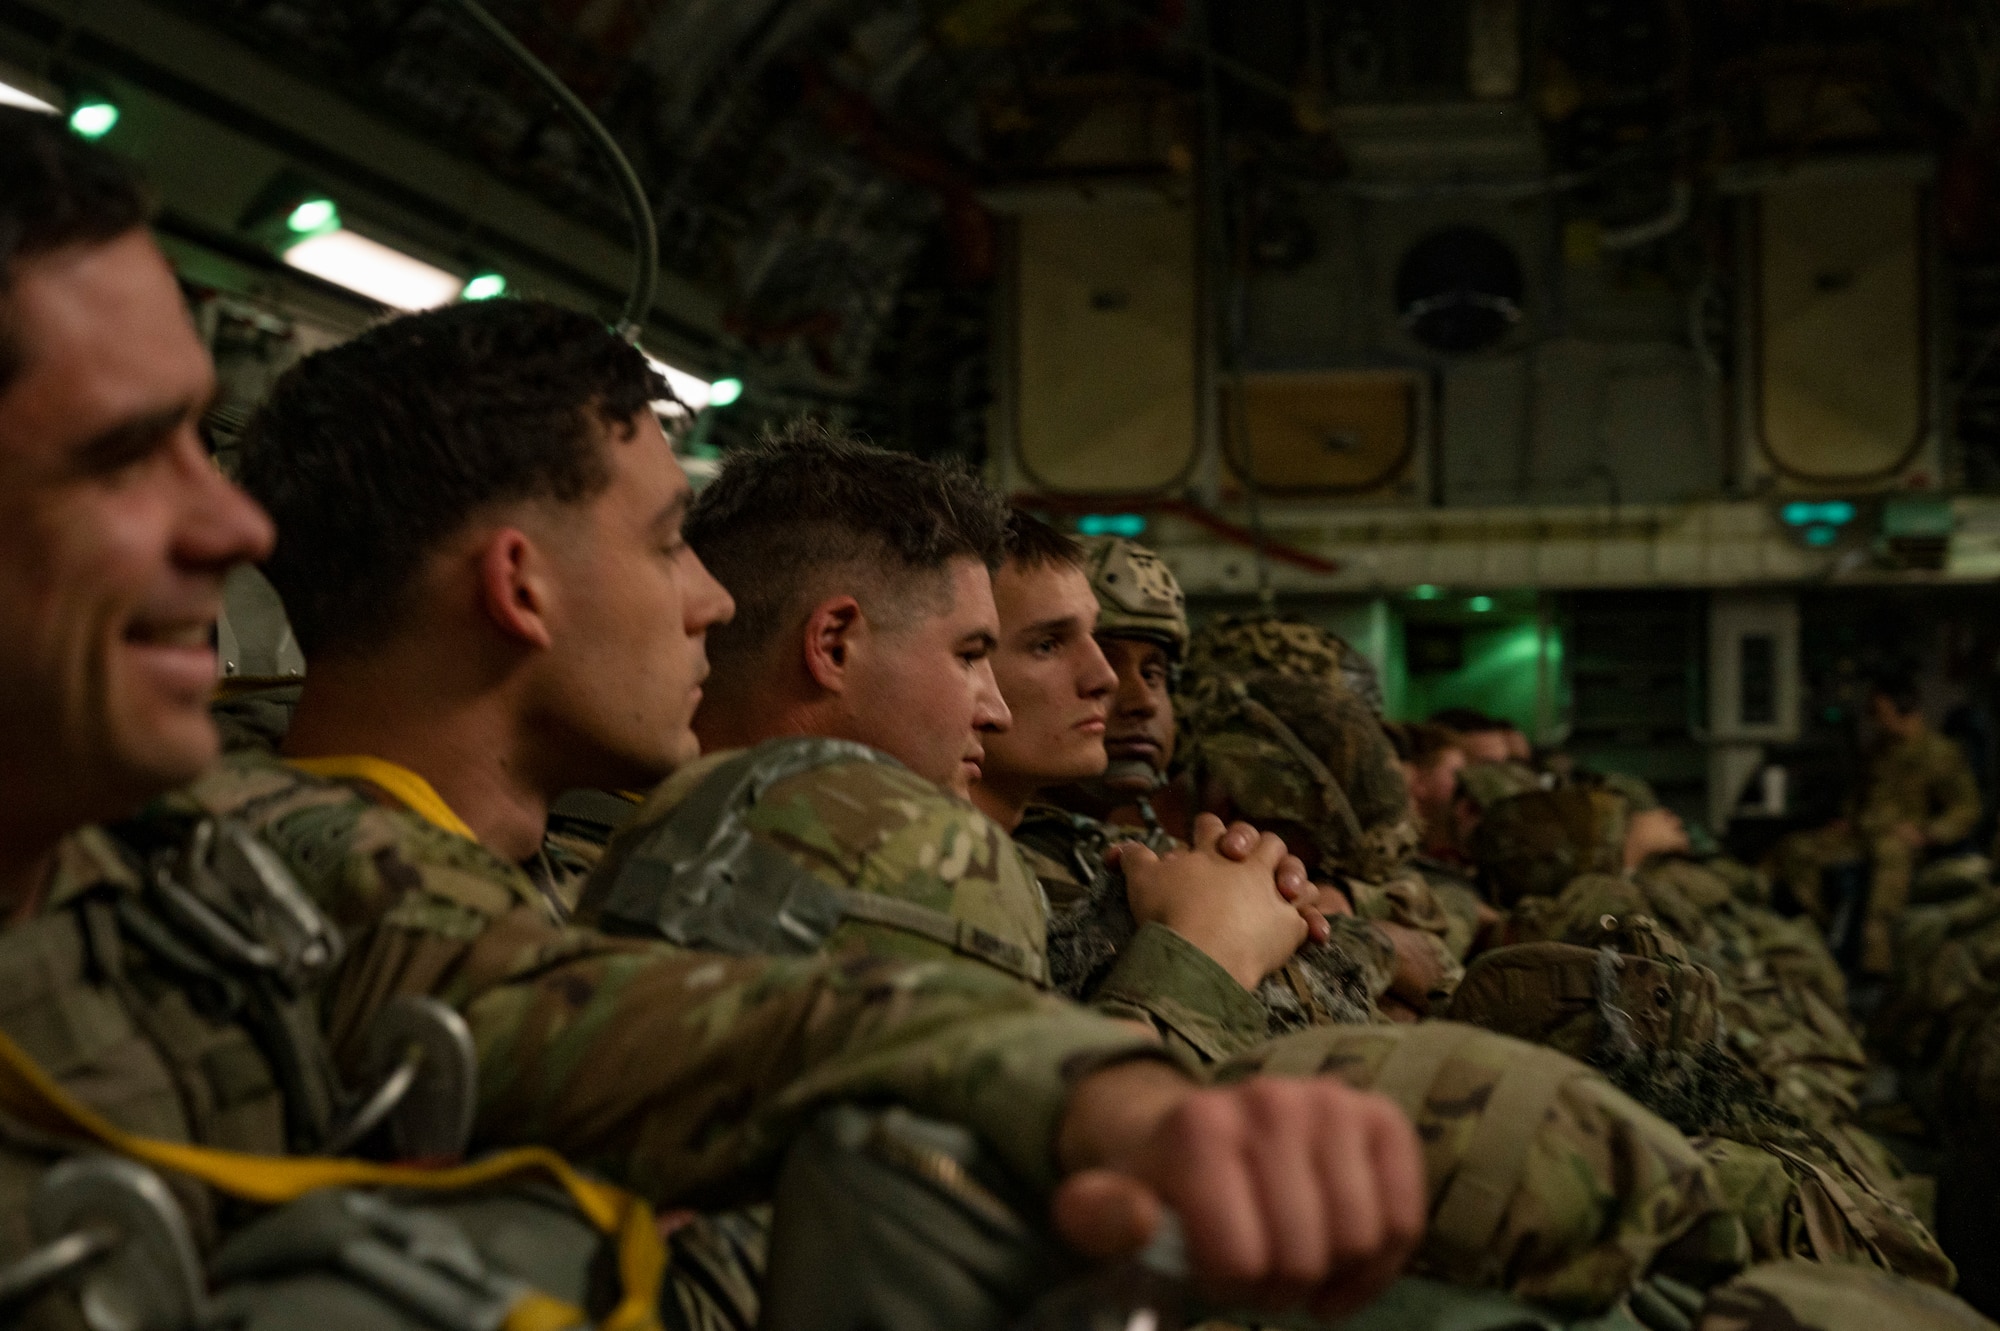 U.S. Army paratroopers assigned to the 82nd Airborne Division, Fort Bragg, North Carolina, wait for takeoff on a C-17 Globemaster III during Battalion Mass Tactical Week, or BMTW, at Pope Army Airfield, North Carolina, Jan. 31, 2022. BMTW is a joint exercise between the U.S. Air Force and the U.S. Army, which gives participants the ability to practice contingency operations in a controlled environment. (U.S. Air Force photo by Airman 1st Class Charles Casner)